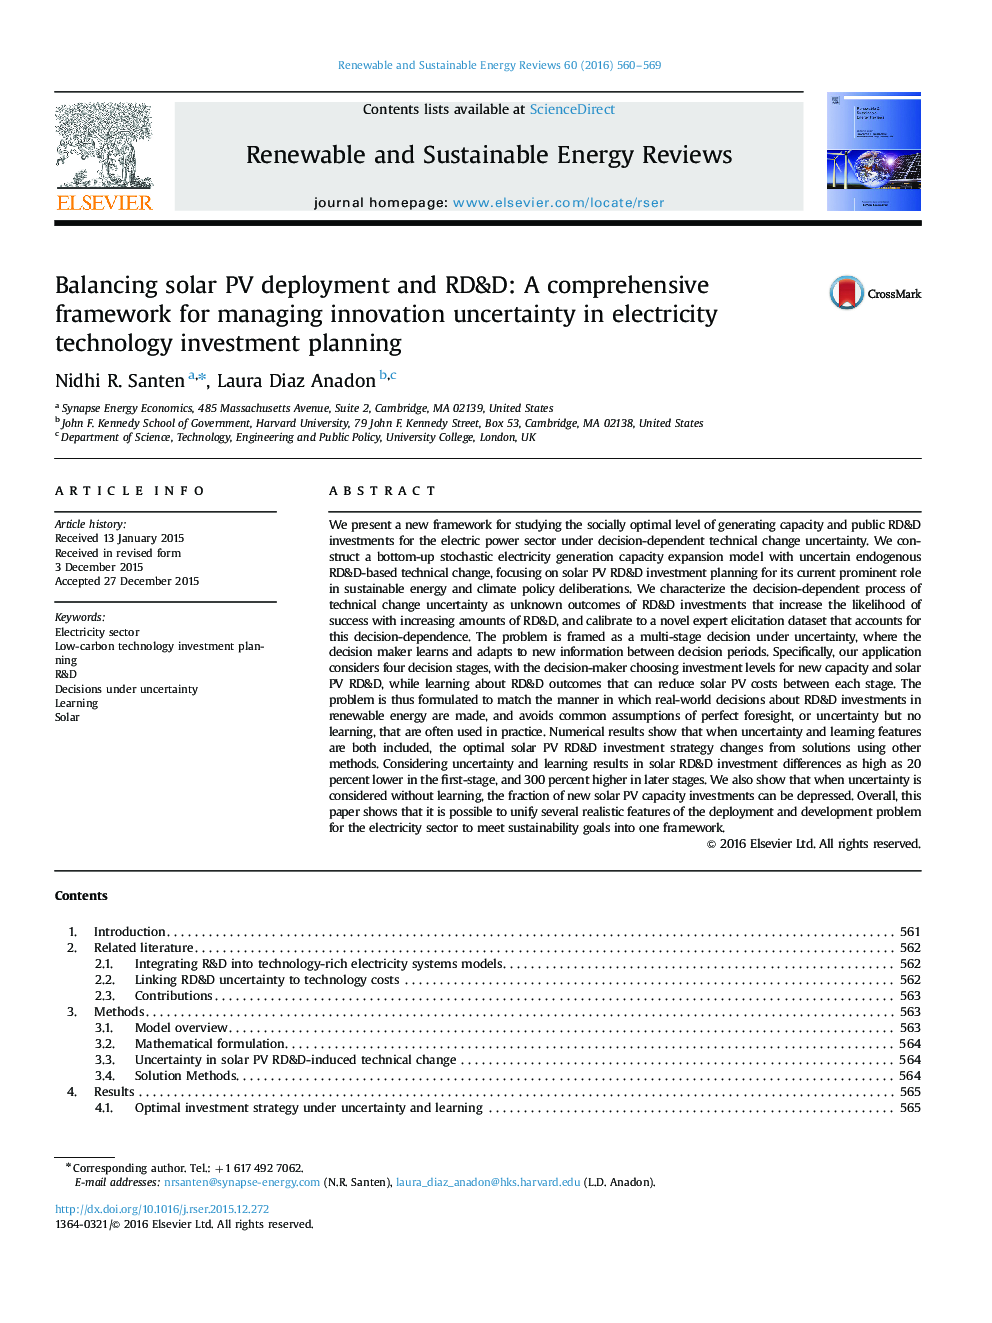 Balancing solar PV deployment and RD&D: A comprehensive framework for managing innovation uncertainty in electricity technology investment planning